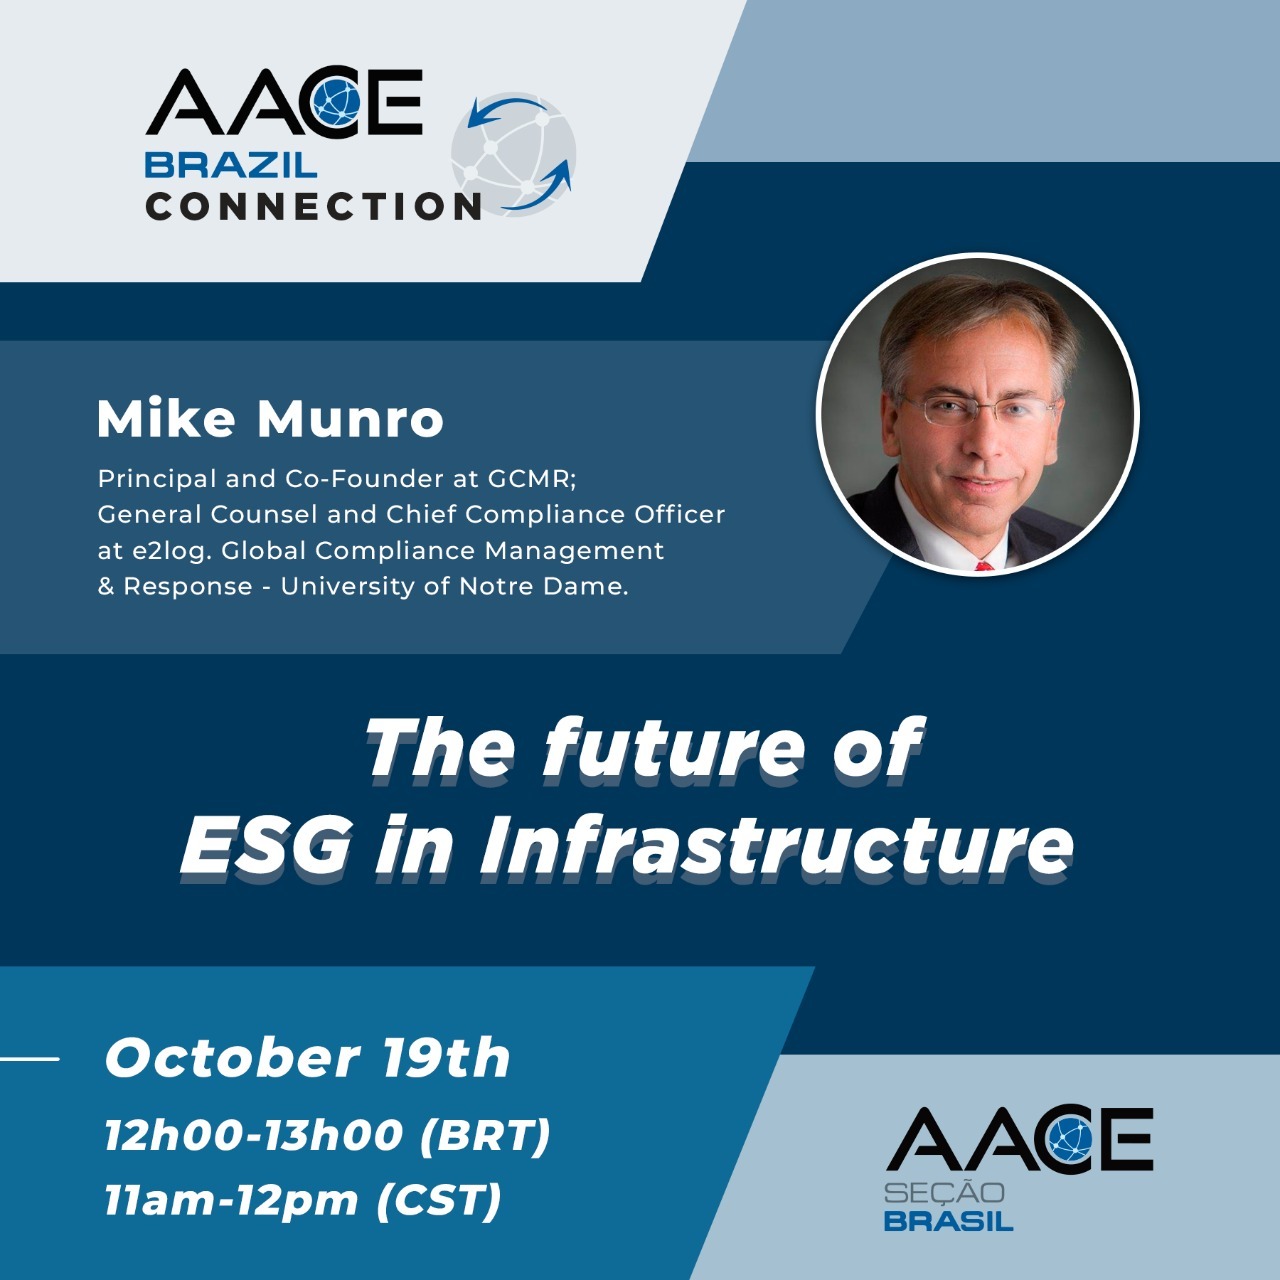 AACE BRAZIL CONNECTION: The future of ESG in infrastructure - AACEI Brasil